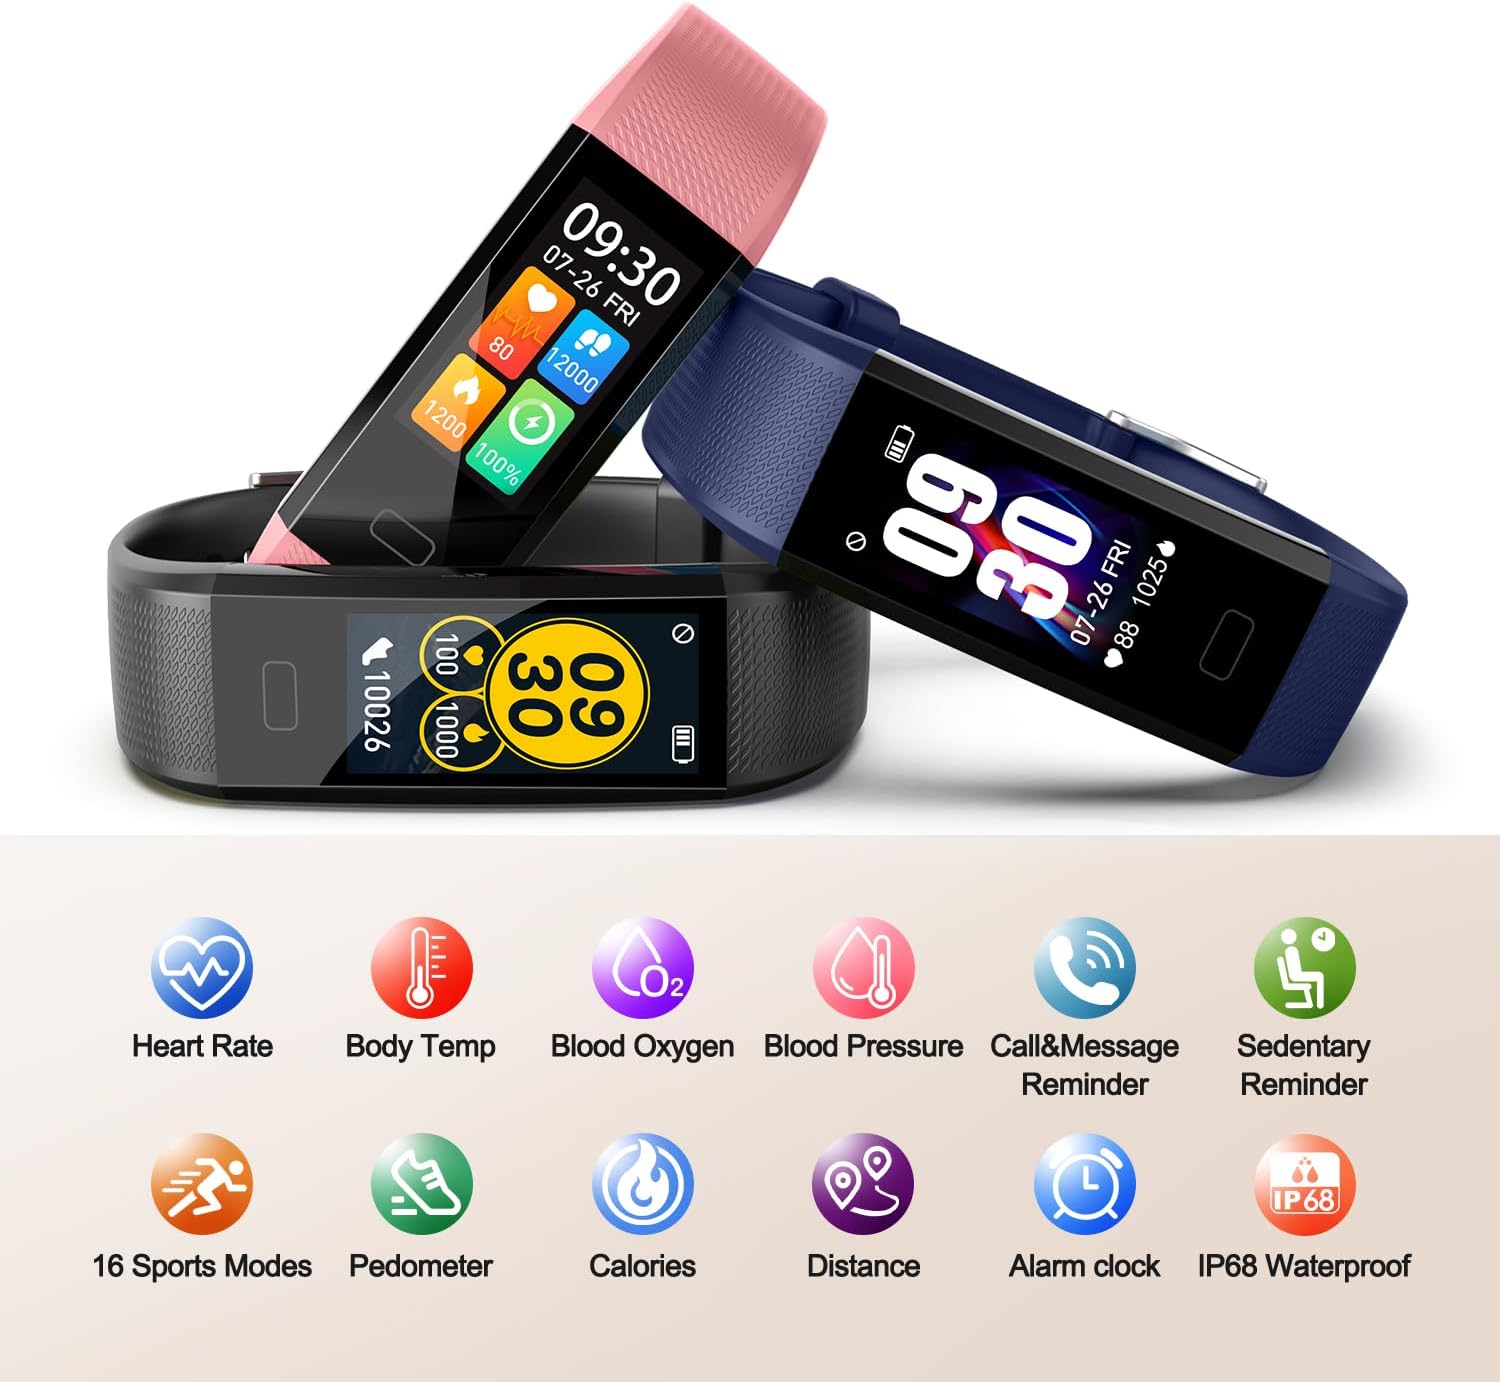 ENGERWALL Pedometer With Calories Tracker - Heart Rate Monitor - Fitness Smartwatch With Call and SMS Receiver